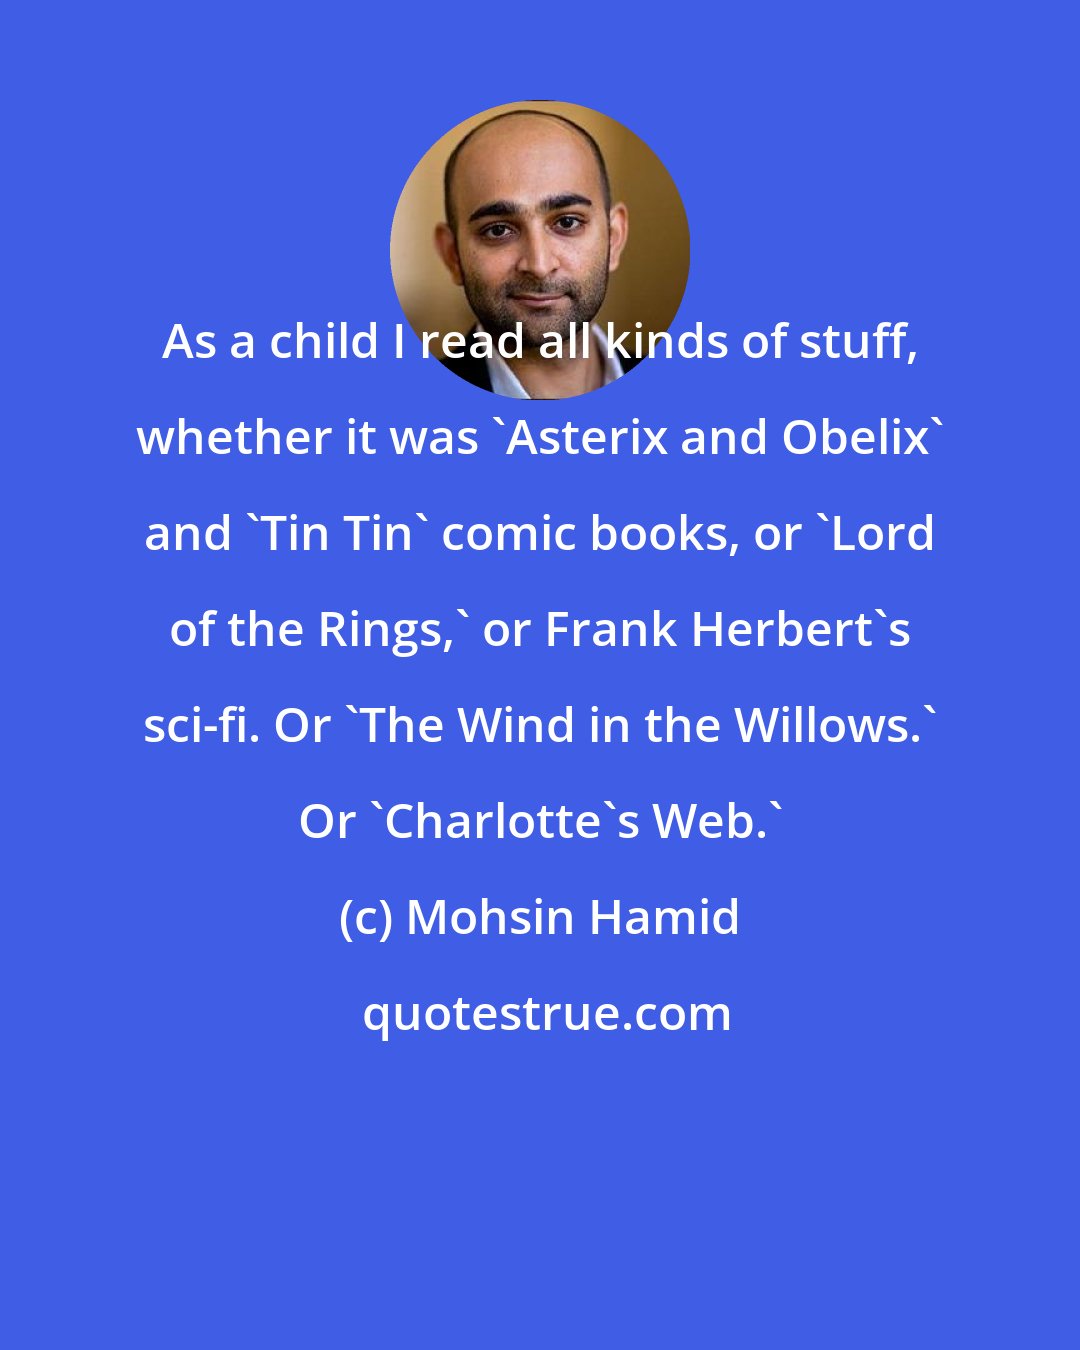 Mohsin Hamid: As a child I read all kinds of stuff, whether it was 'Asterix and Obelix' and 'Tin Tin' comic books, or 'Lord of the Rings,' or Frank Herbert's sci-fi. Or 'The Wind in the Willows.' Or 'Charlotte's Web.'